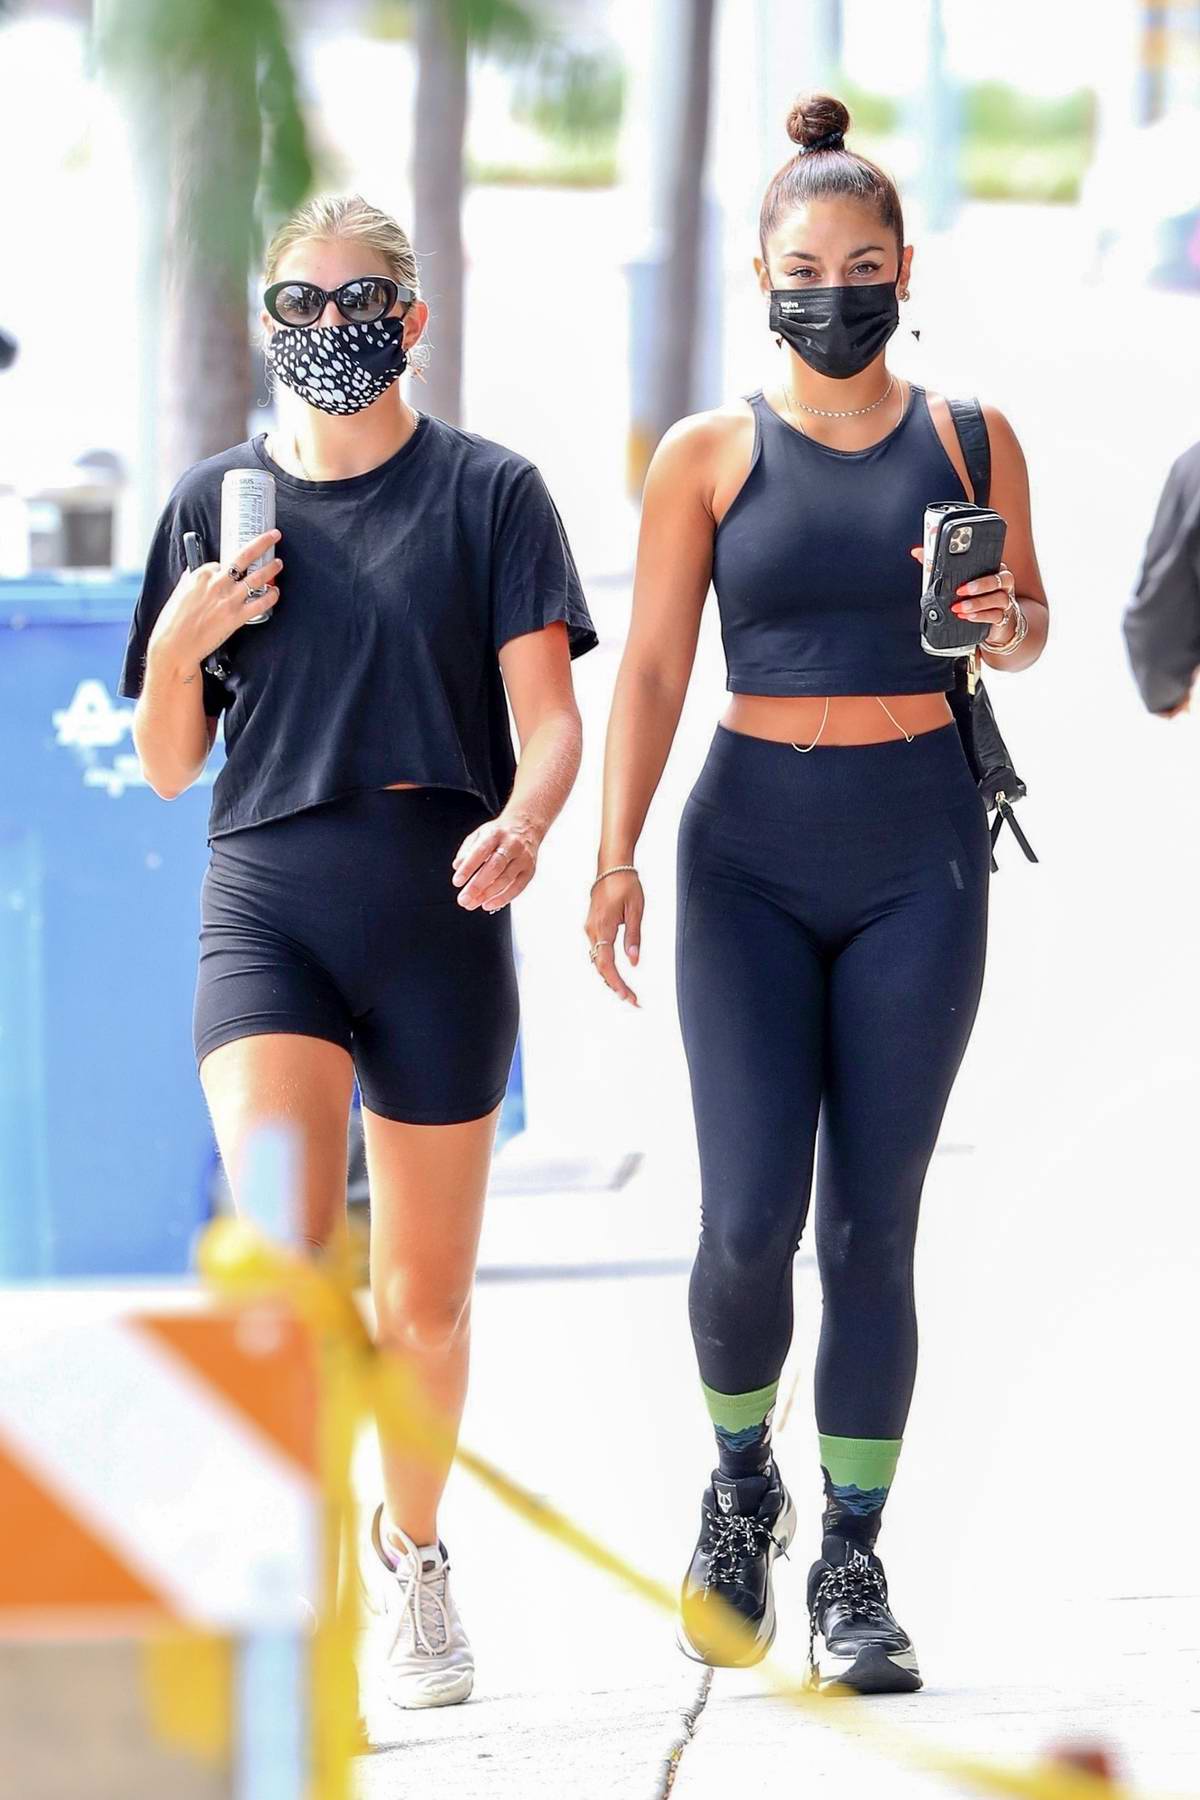 Vanessa Hudgens shows off her fit figure in black workout top and